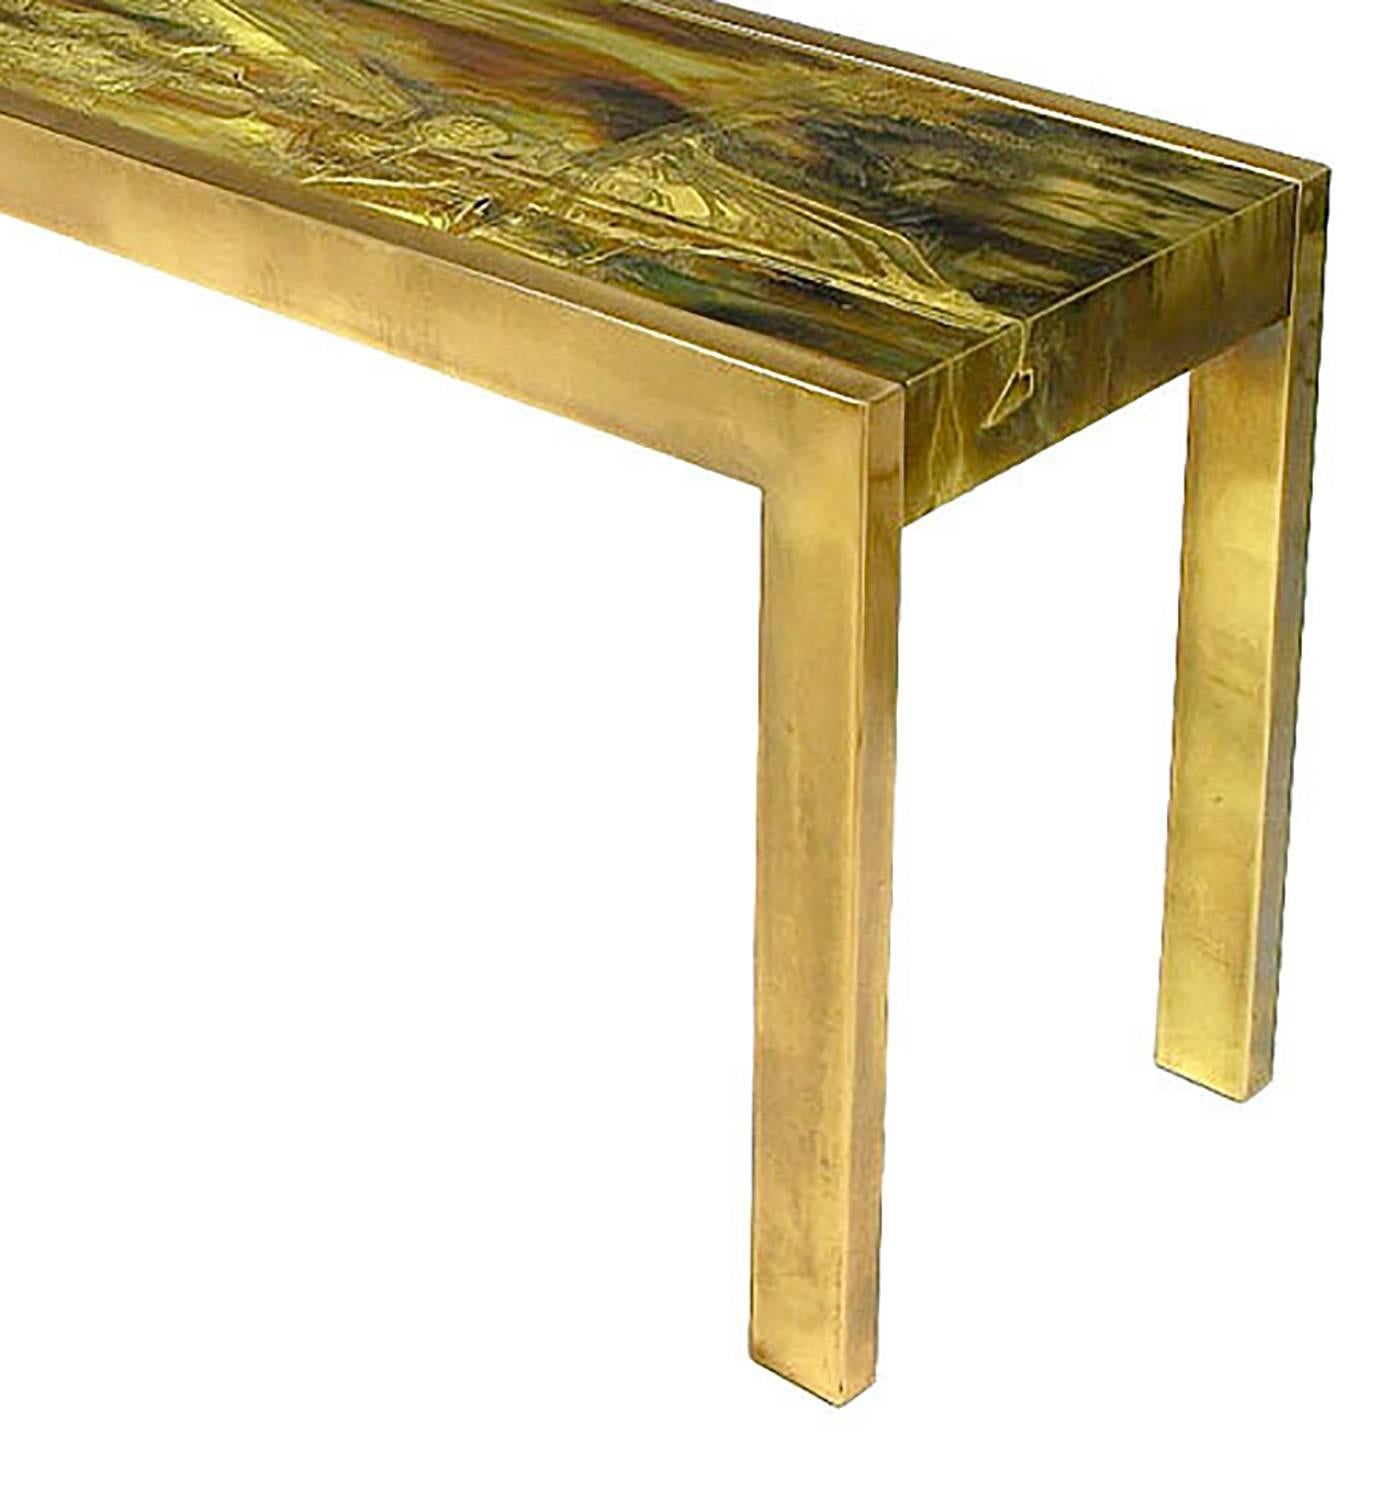 American Mastercraft Brass Console with Bernhard Rohne Acid-Etched Top